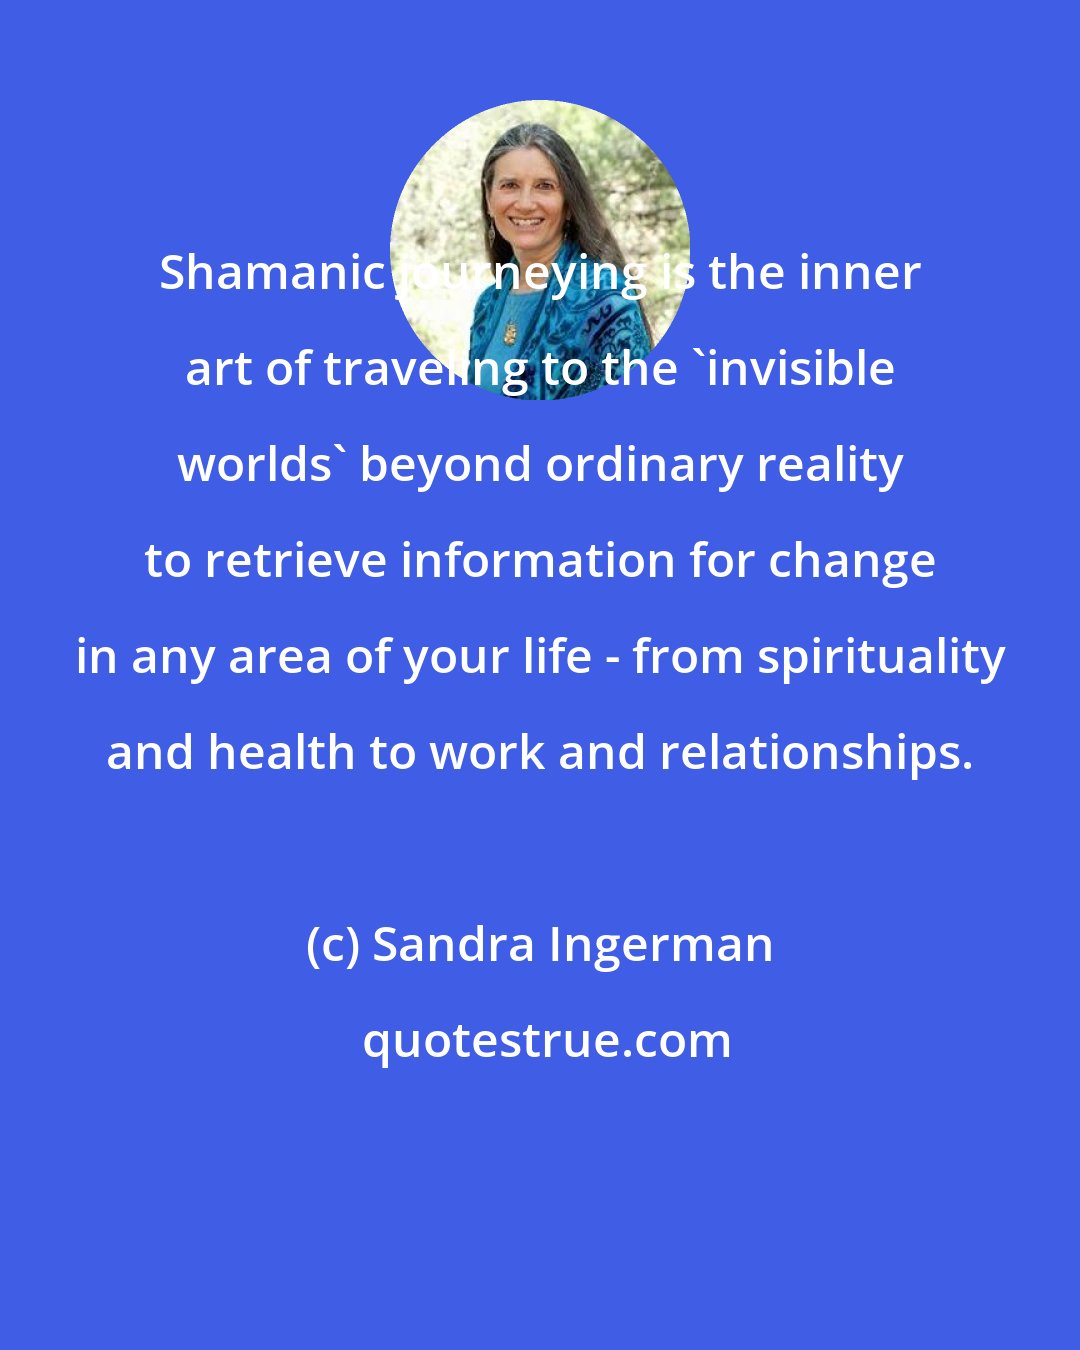 Sandra Ingerman: Shamanic journeying is the inner art of traveling to the 'invisible worlds' beyond ordinary reality to retrieve information for change in any area of your life - from spirituality and health to work and relationships.